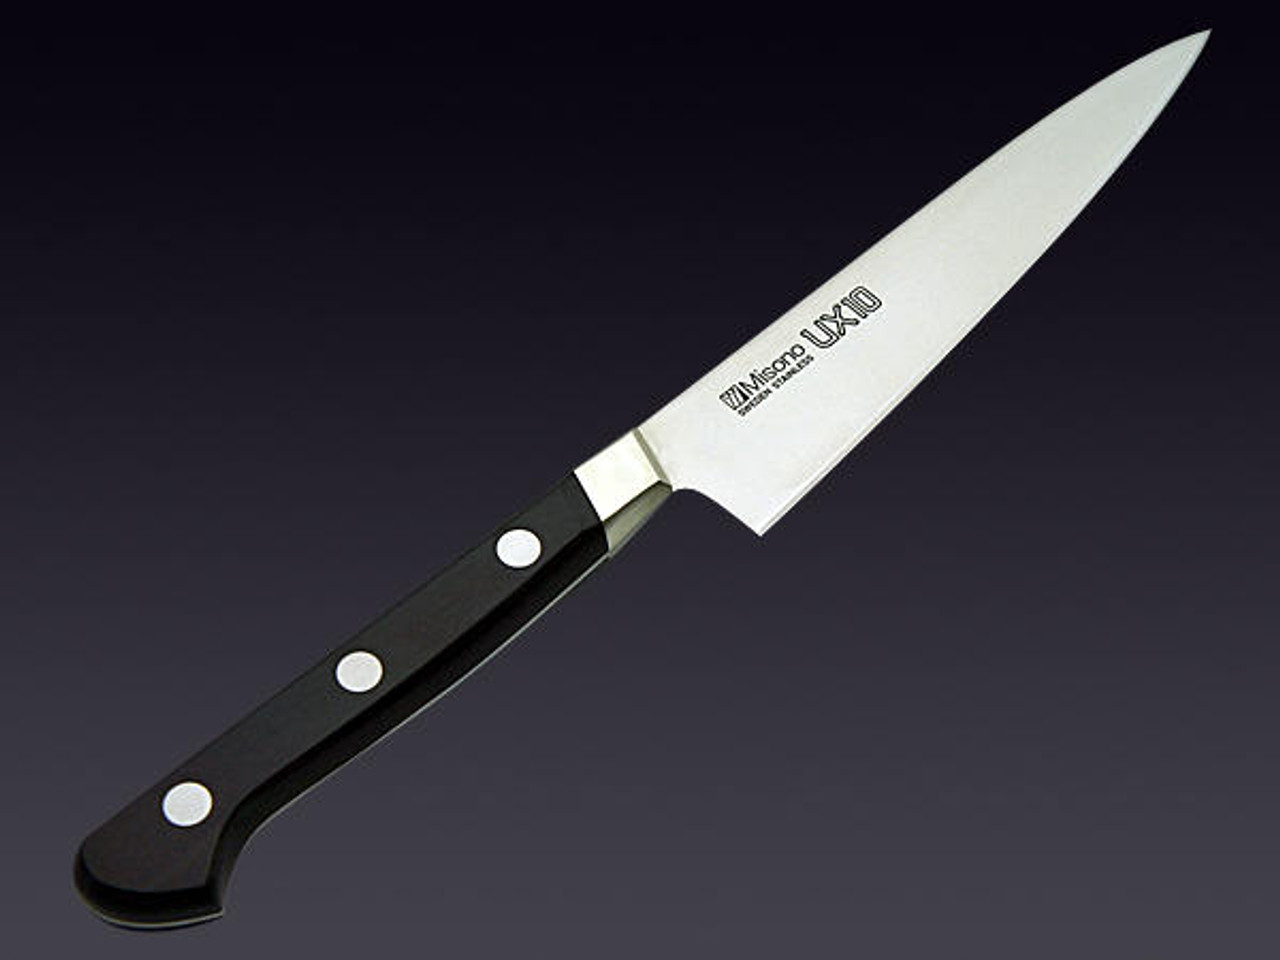 https://cdn11.bigcommerce.com/s-attnwxa/images/stencil/1280x1280/products/360/185244/misono-misono-ux10-swedish-stainless-japanese-chefs-petty-knifeutility-130mm__73889.1635508093.jpg?c=2